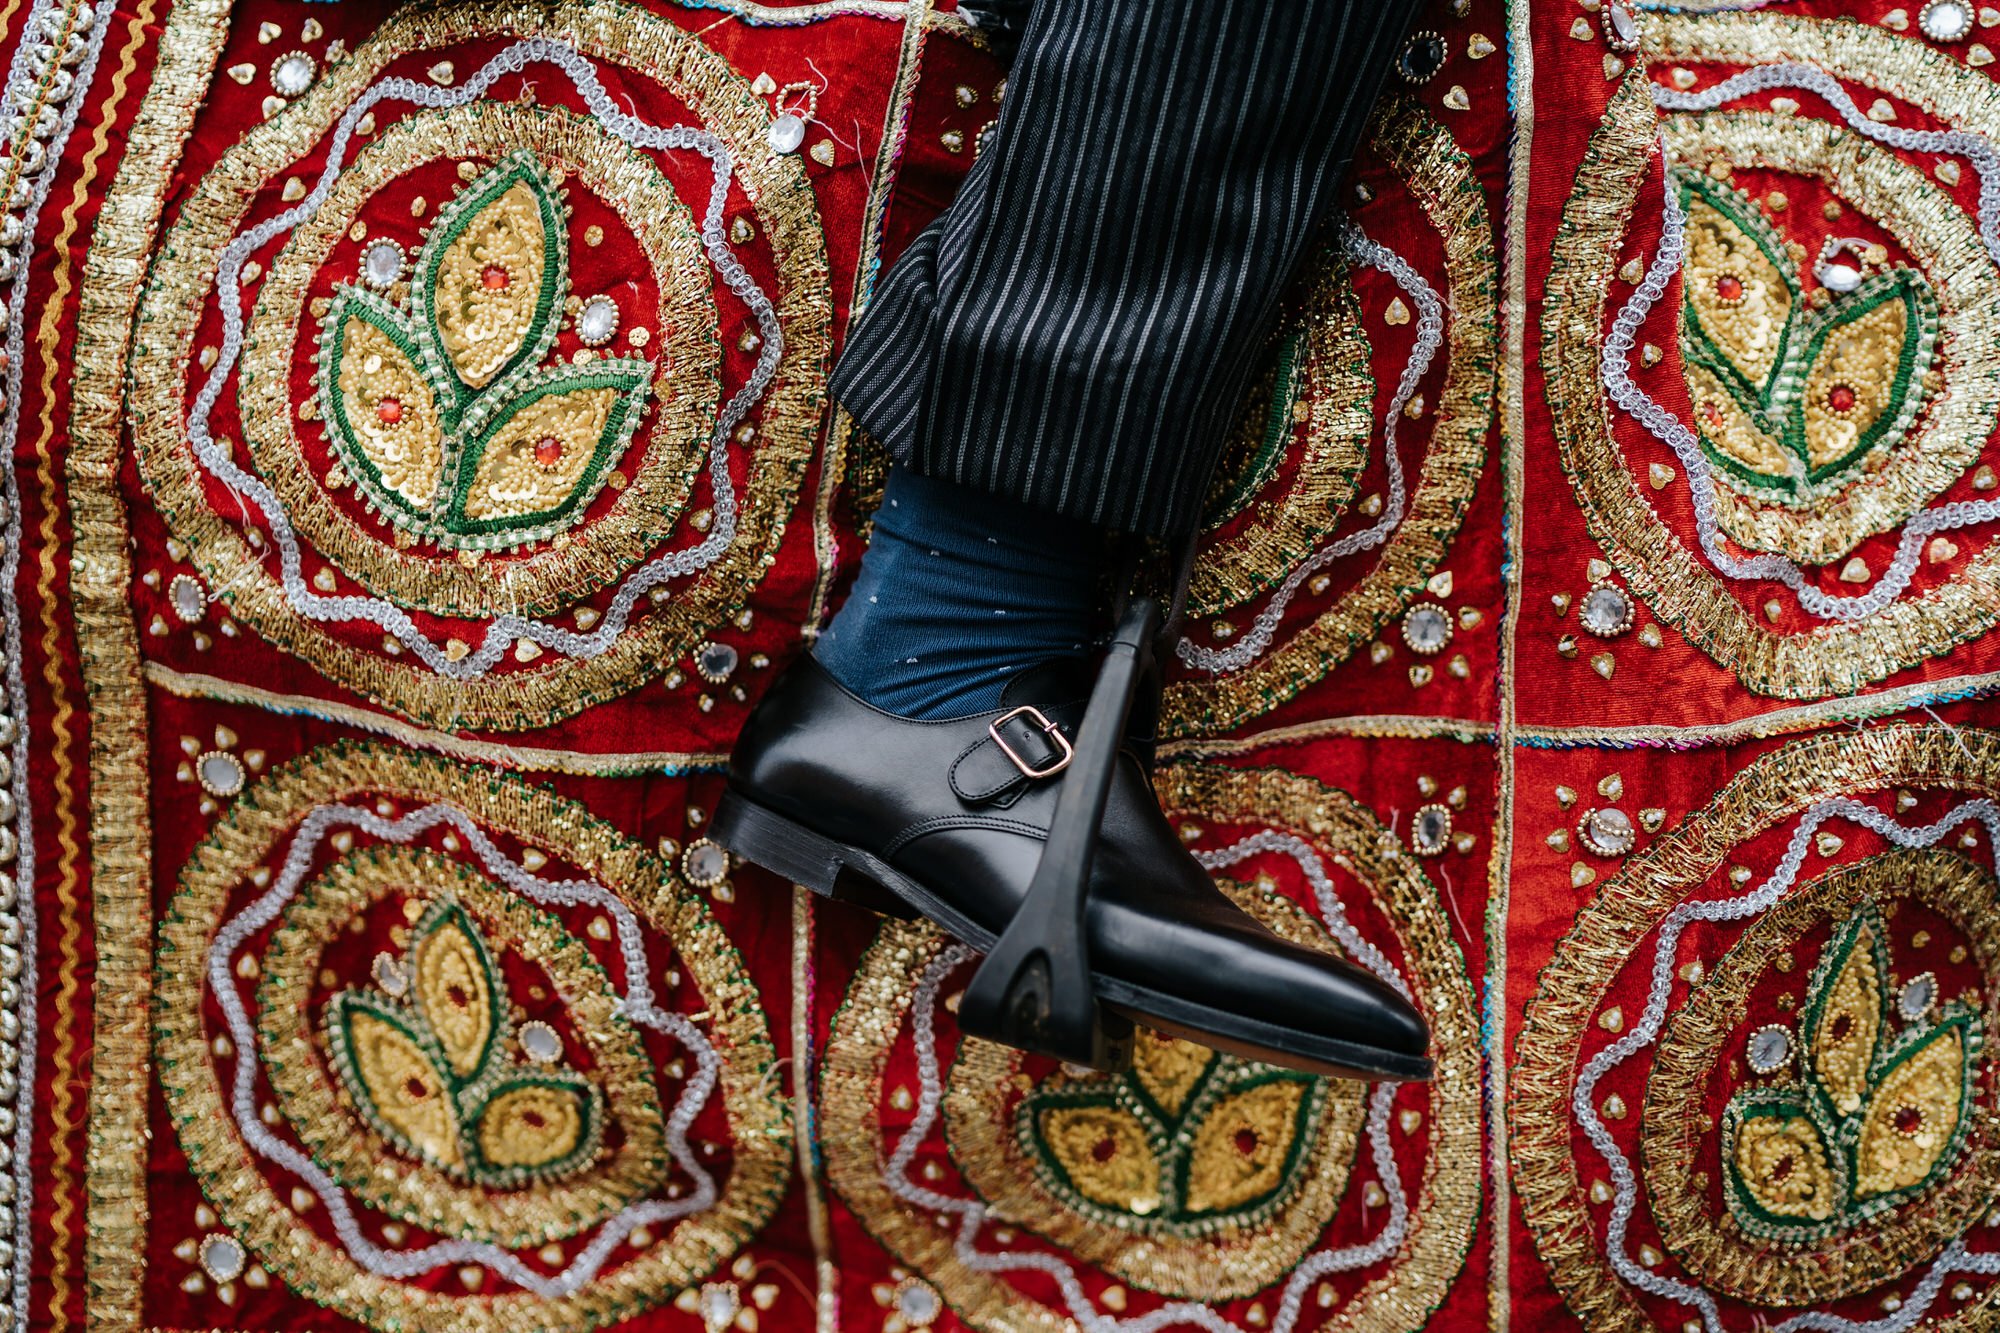 Textures of a horse's decoration for Indian wedding Bahrat as groom's foot rests in the stirrup